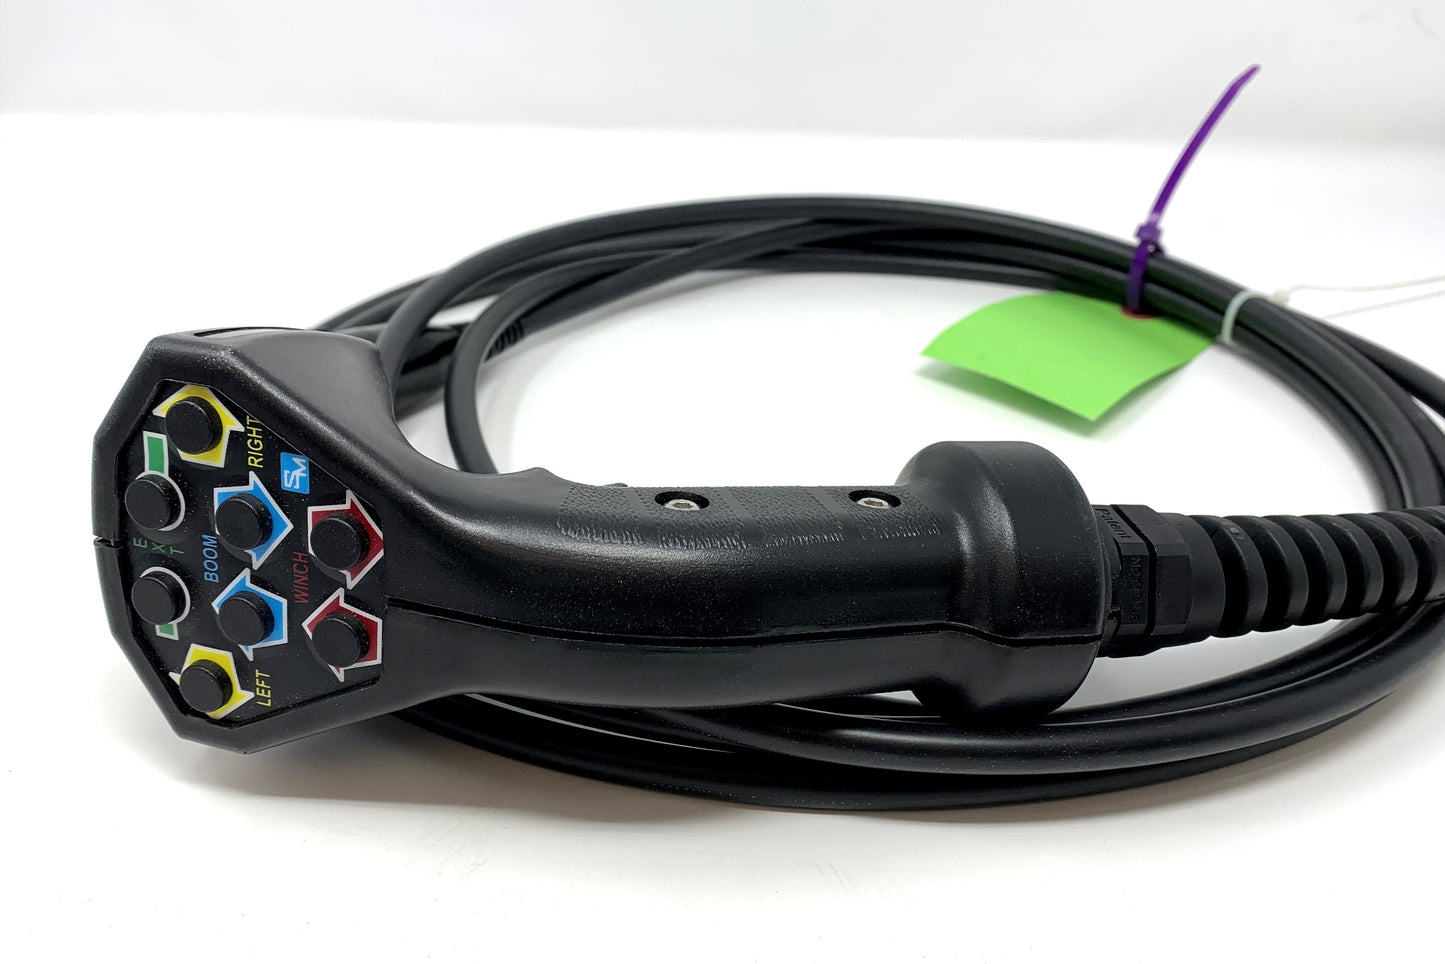 8-Button Controller with Trigger  20' Cord